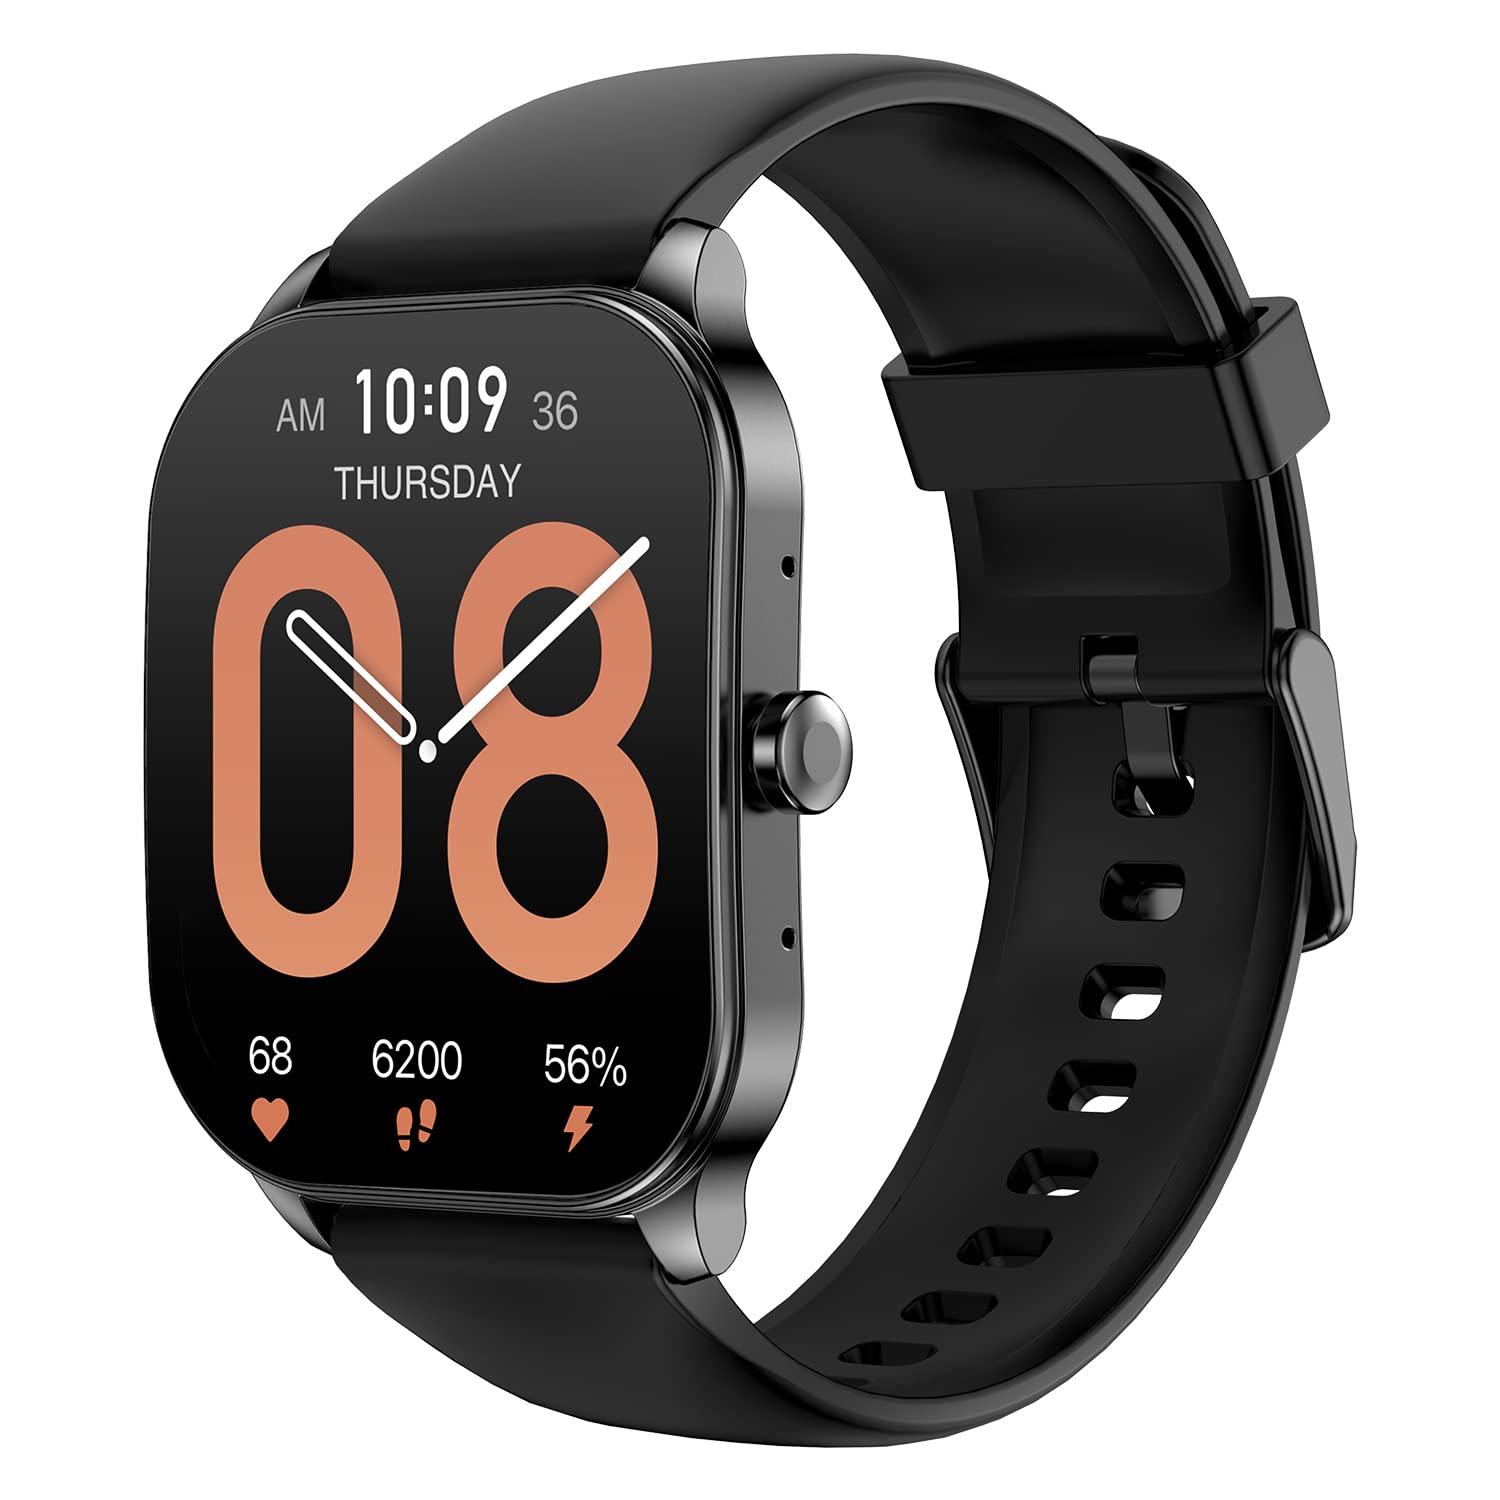 Amazfit Pop 3S Smart Watch with 1.96" AMOLED Display, Bluetooth Calling, SpO2, 12-Day Battery Life, AI Voice Assistance, 100 Sports Modes, 24H HR Monitor, Music Control, Over 100 Watch Faces (Black)